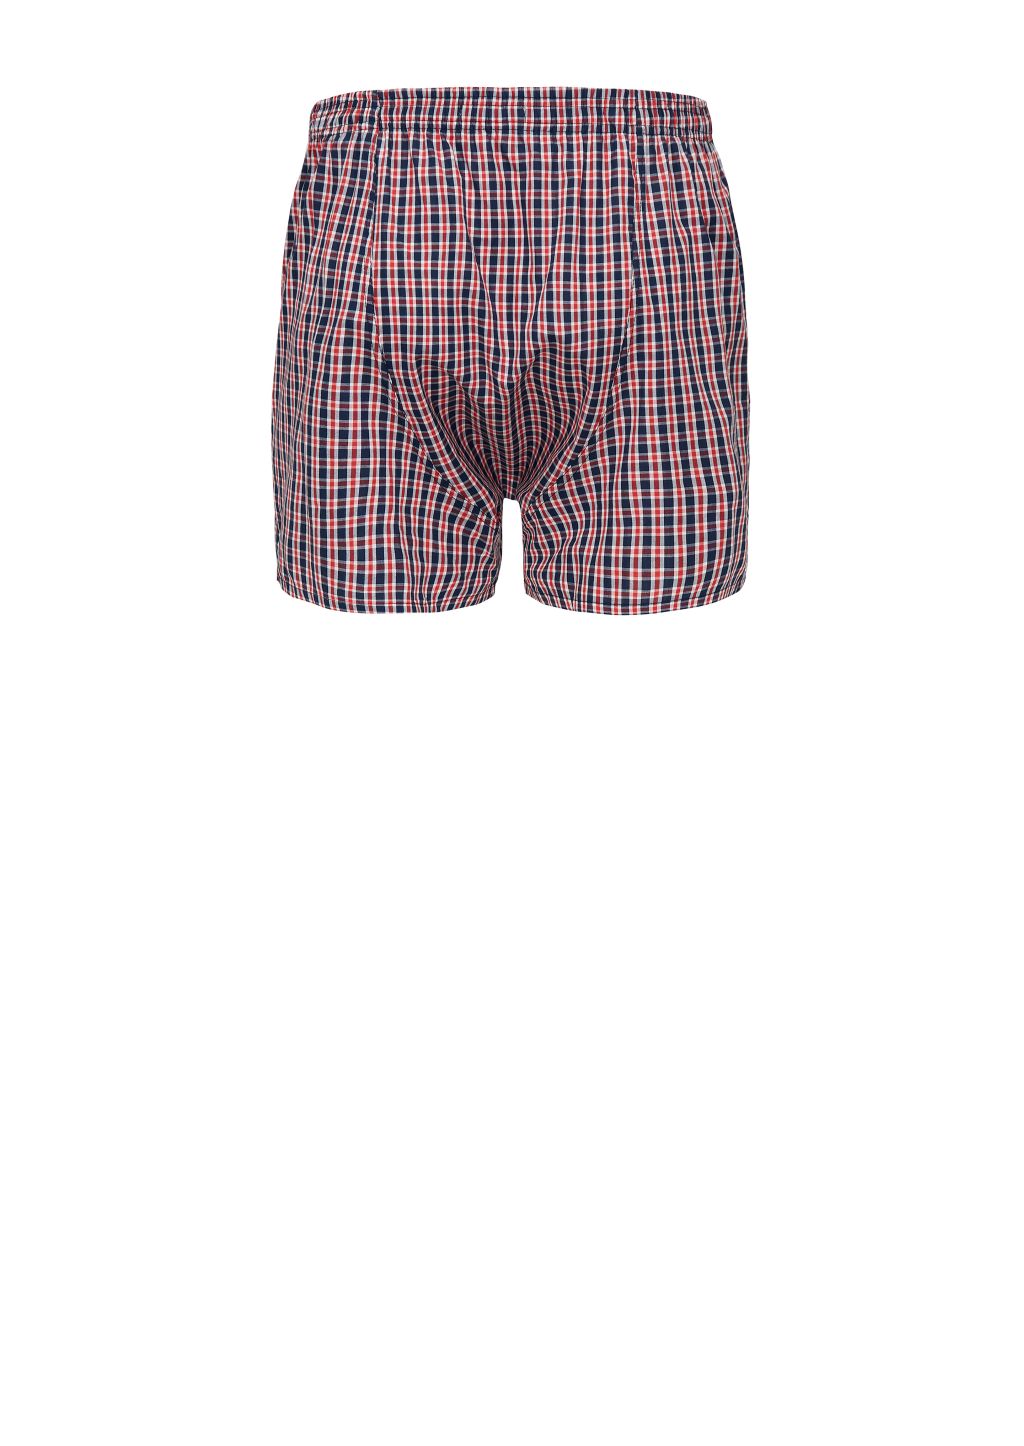 Männer Boxershorts #Checked Blue/White/Red Checked L